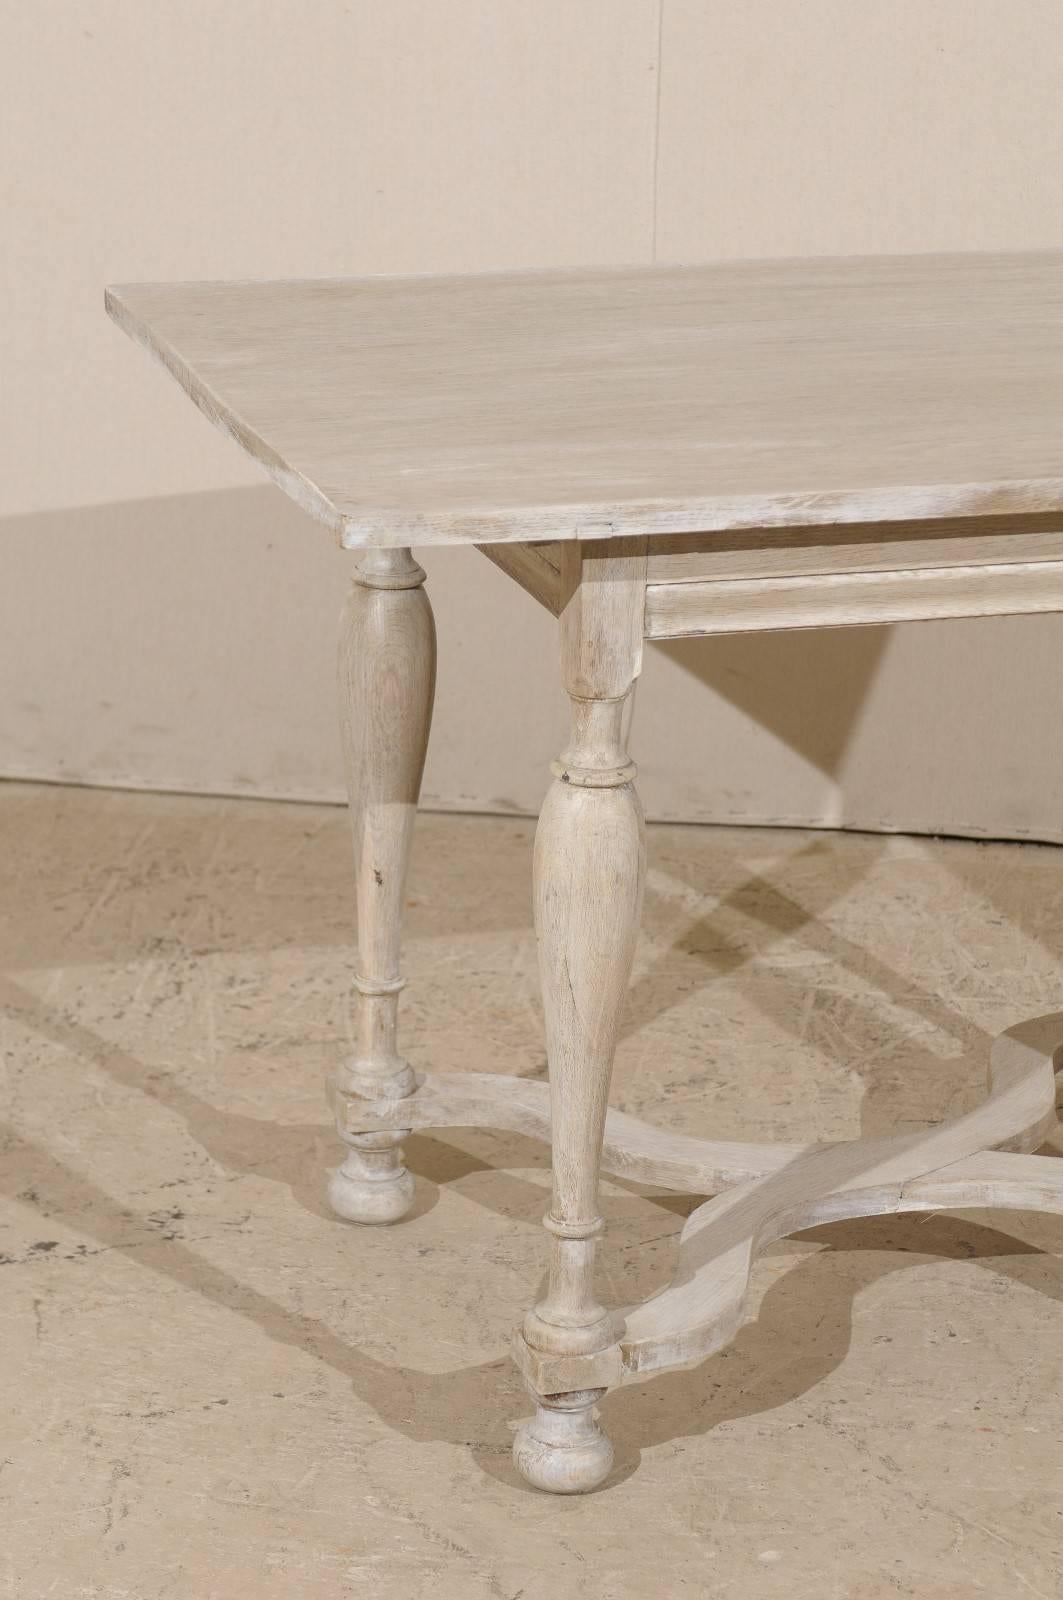 Painted Swedish Baroque Style Side Table, Light Colored Wash, Turned Legs and Ball Feet